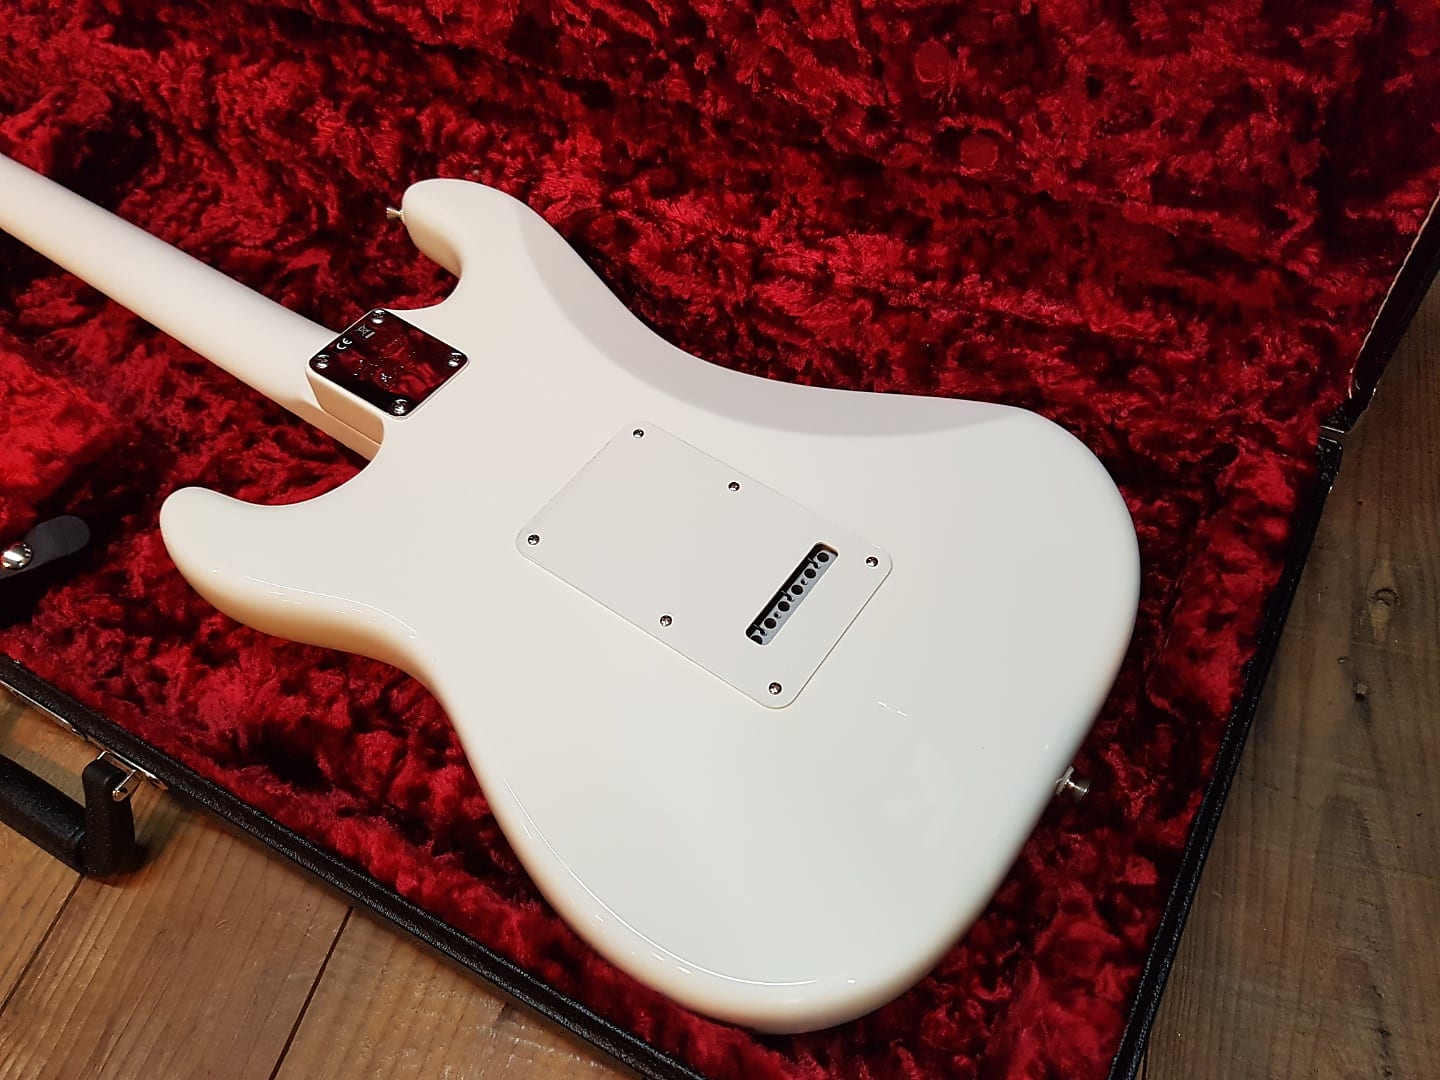 The back of the all-white Supreme Limited Edition Stratocaster. If only the guitar didn't have the darn red "Supreme" logo between the picks, which diminishes the guitar's immaculate beauty